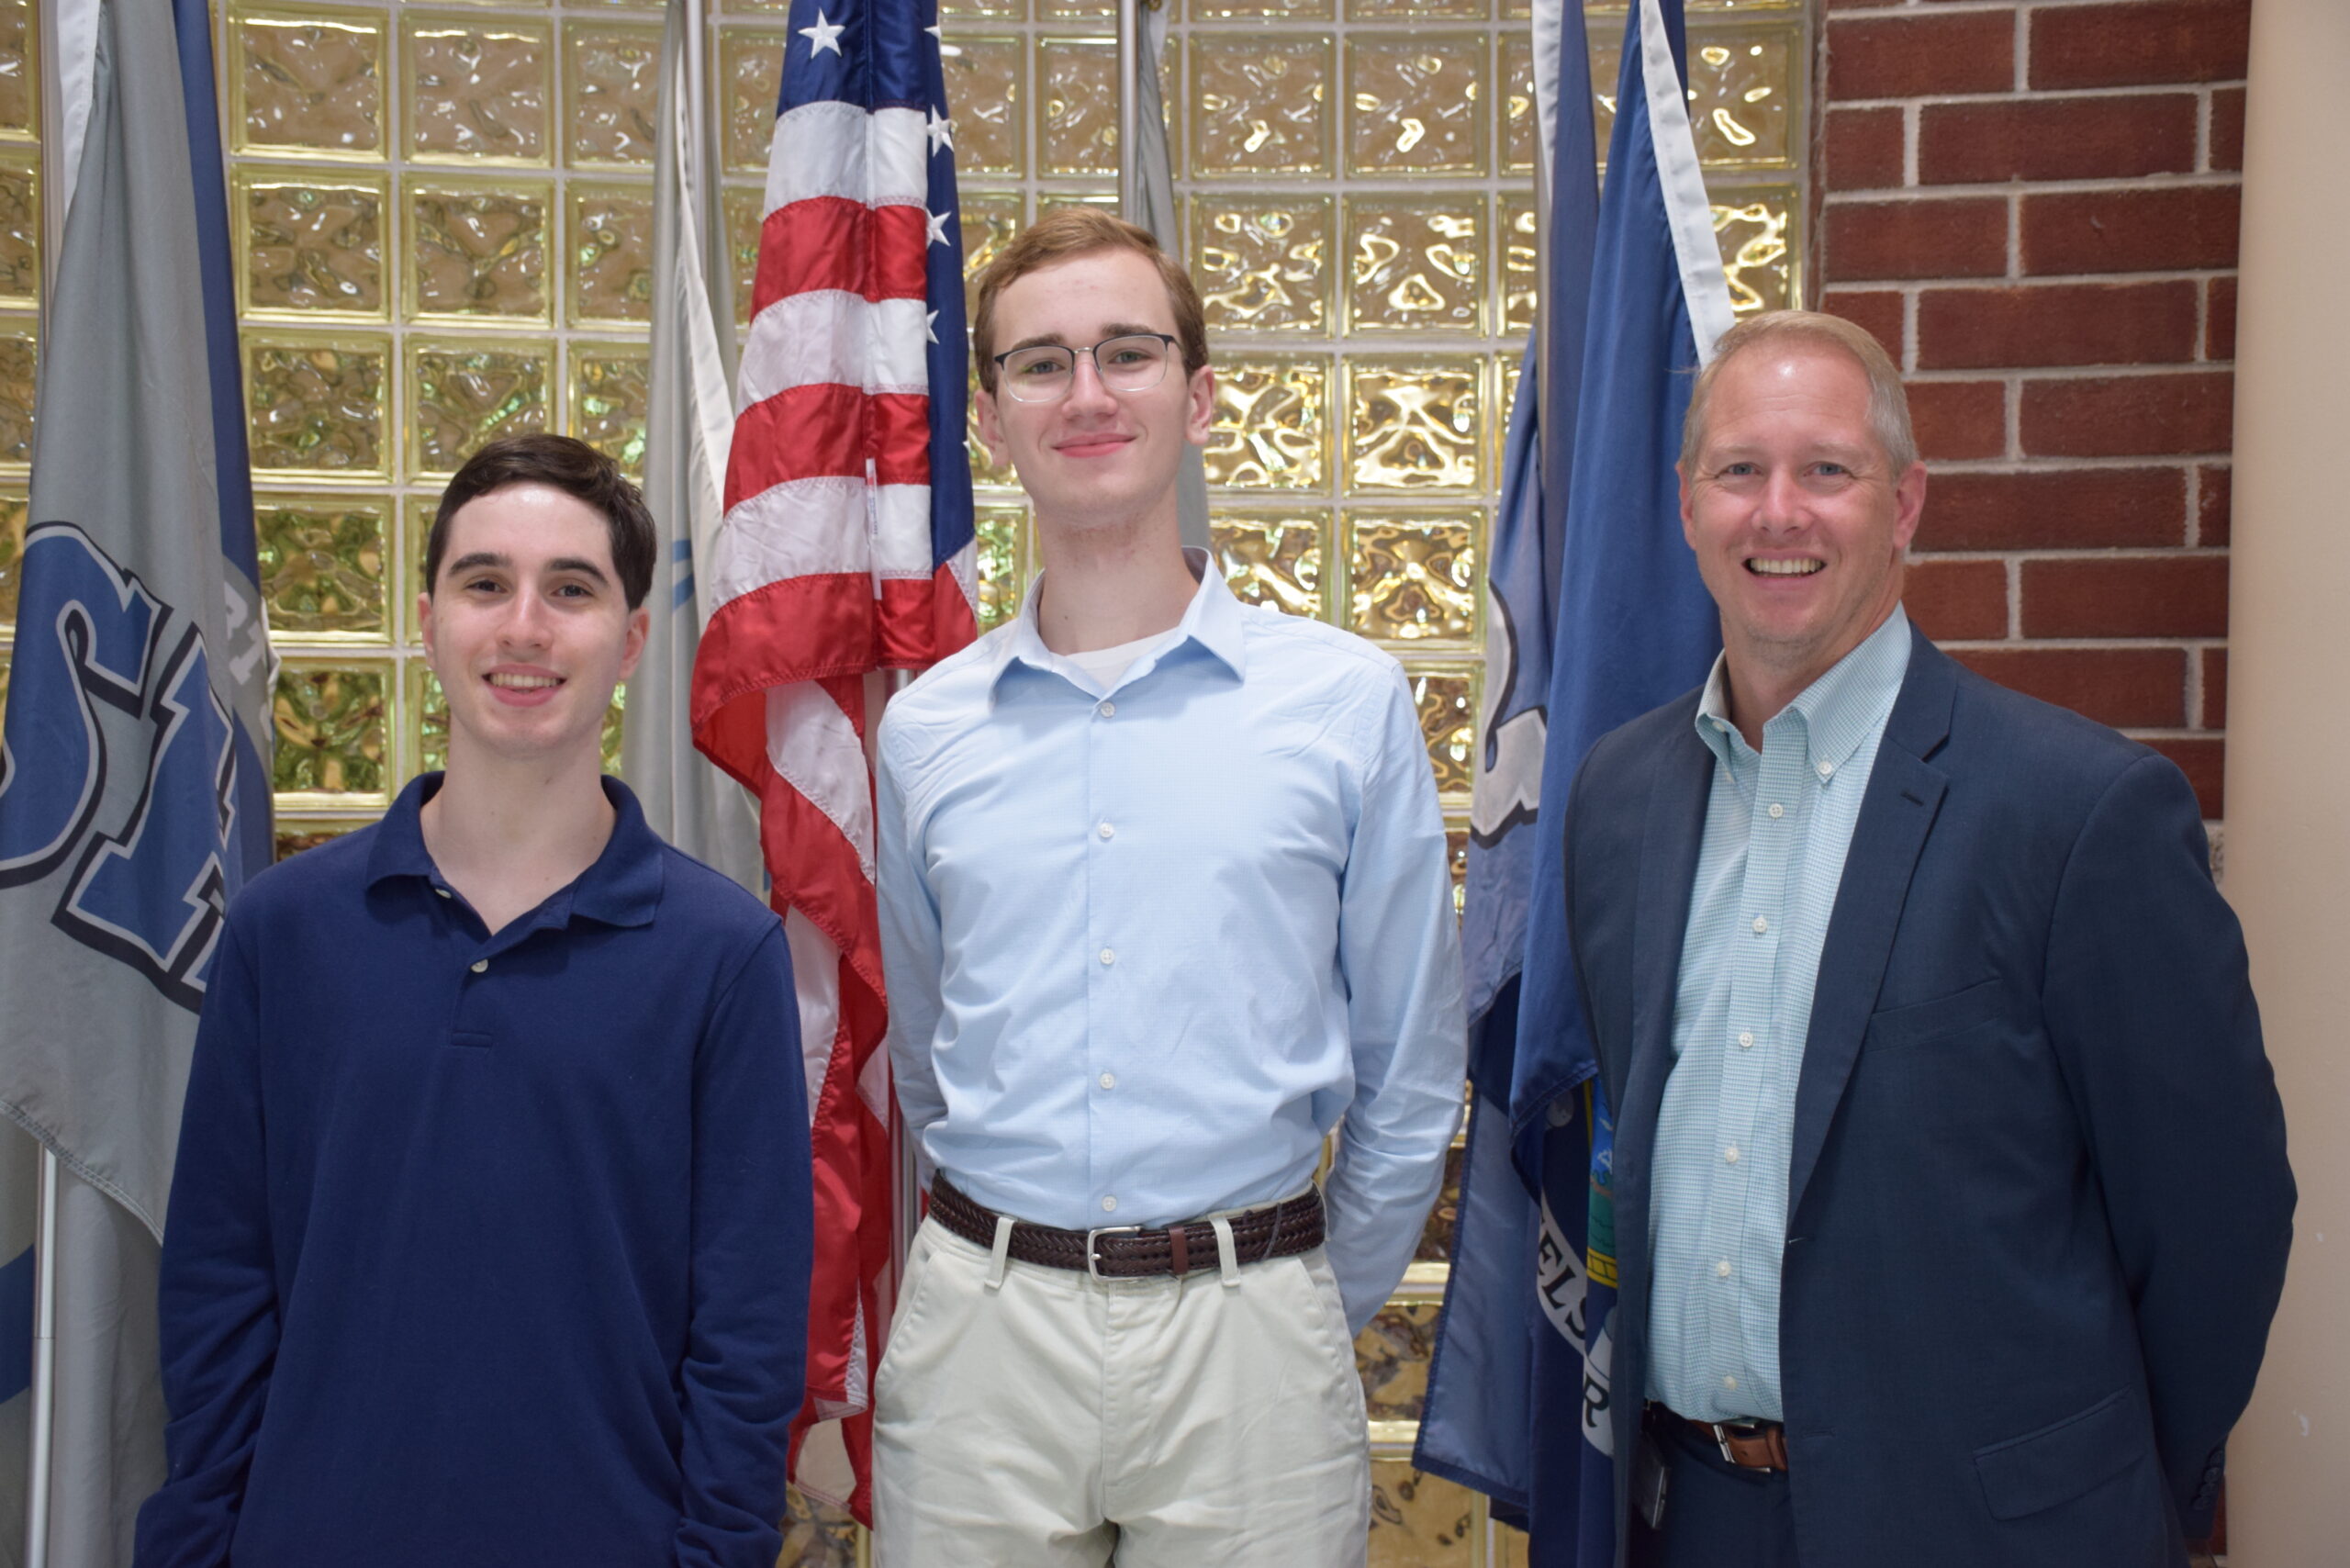 Eastport-South Manor Junior-Senior High School students Benjamin Isaacson, left, and Aidan Young were named National Merit Scholarship Program semifinalists. They are congratulated by Principal Salvatore Alaimo. COURTESY EASTPORT-SOUTH MANOR SCHOOL DISTRICT